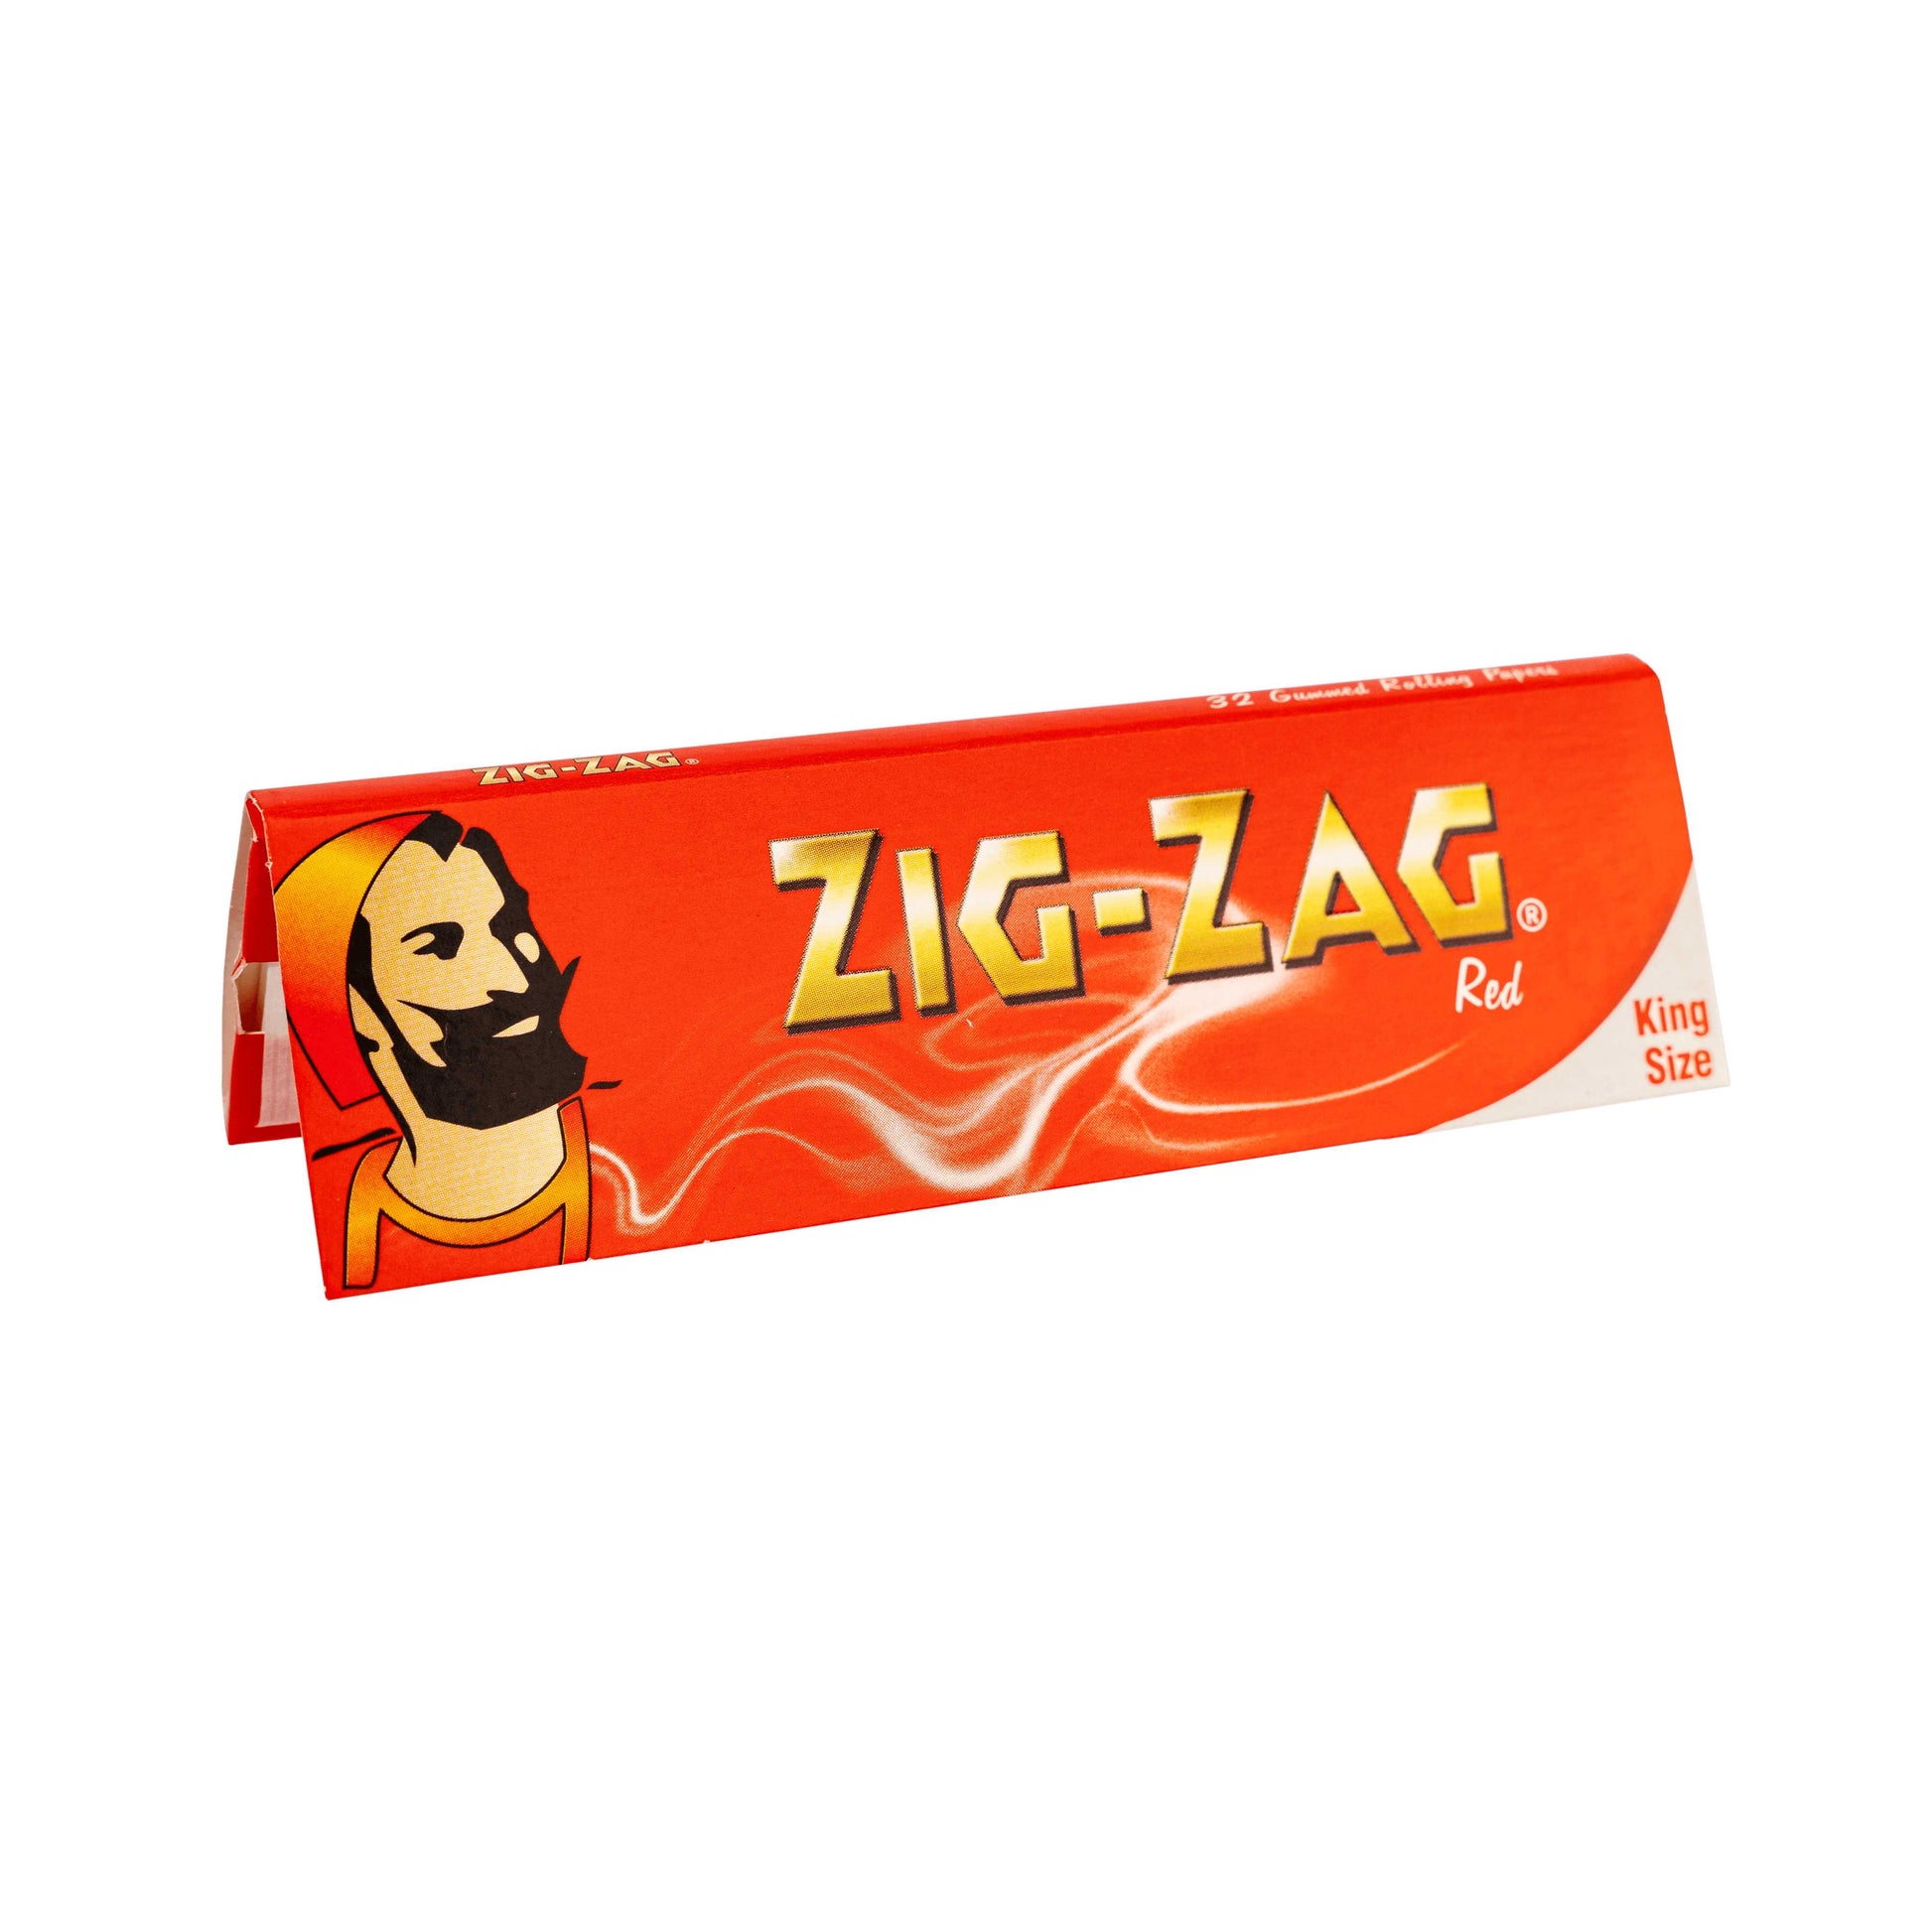 Zig-Zag Rolling Papers - Red King Size - - Rolling Papers - Zig-Zag - Cali Tobacconist